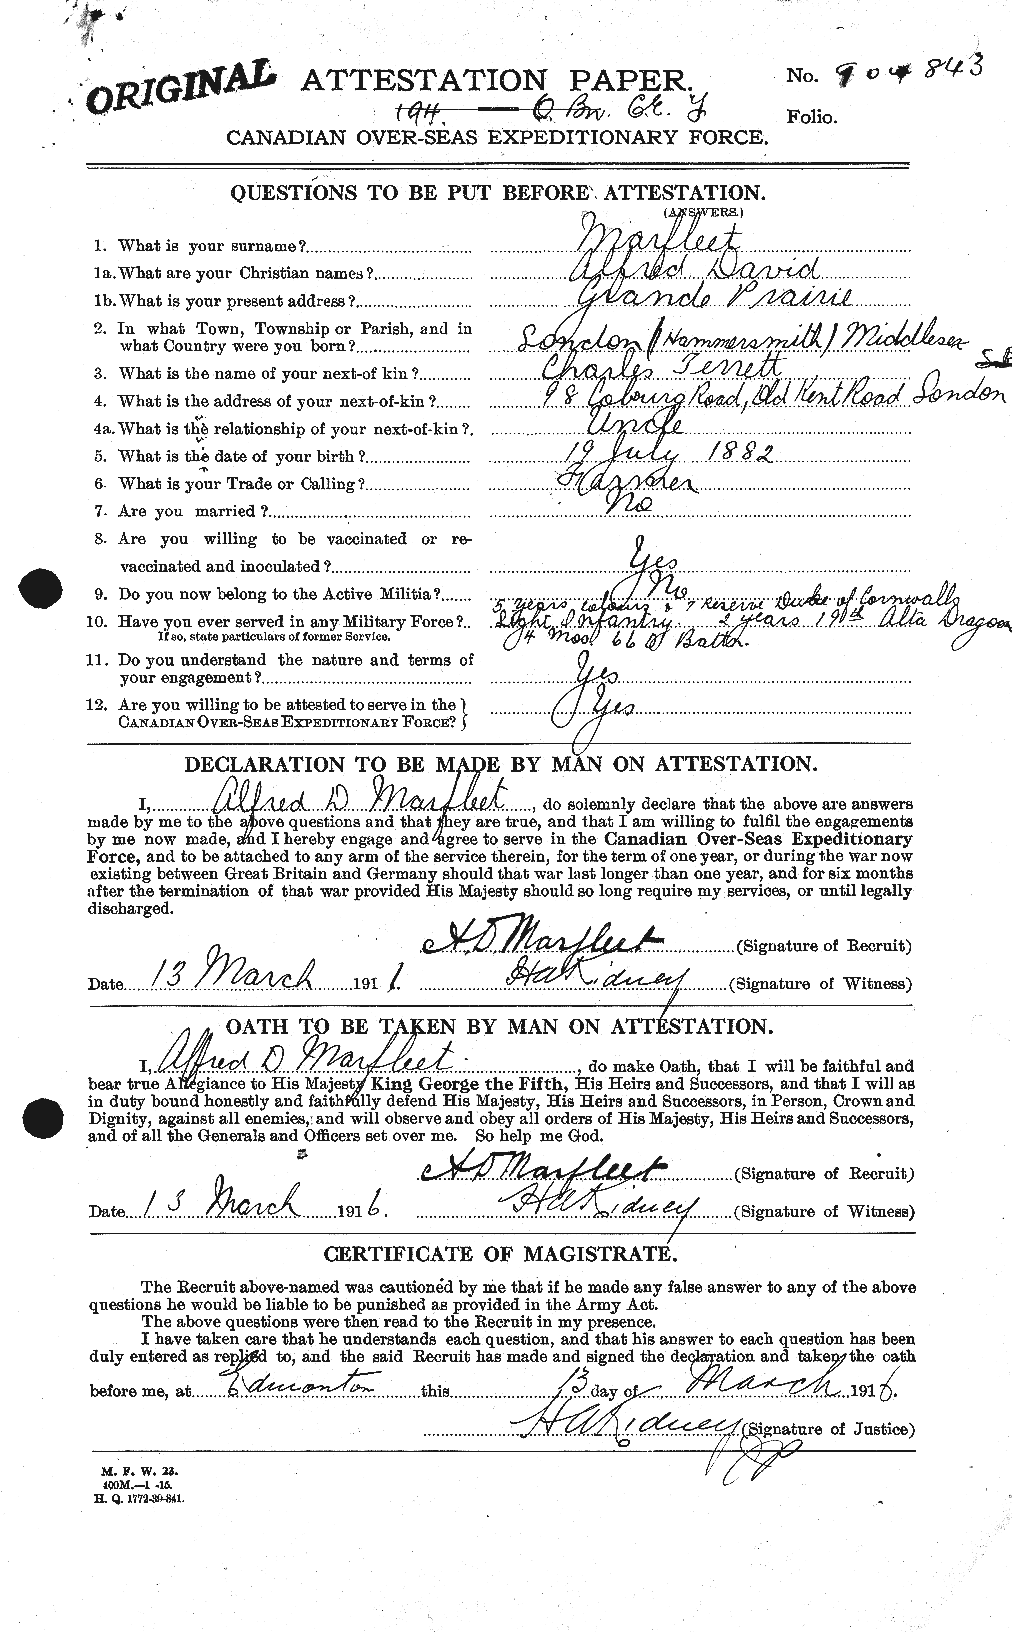 Personnel Records of the First World War - CEF 481244a